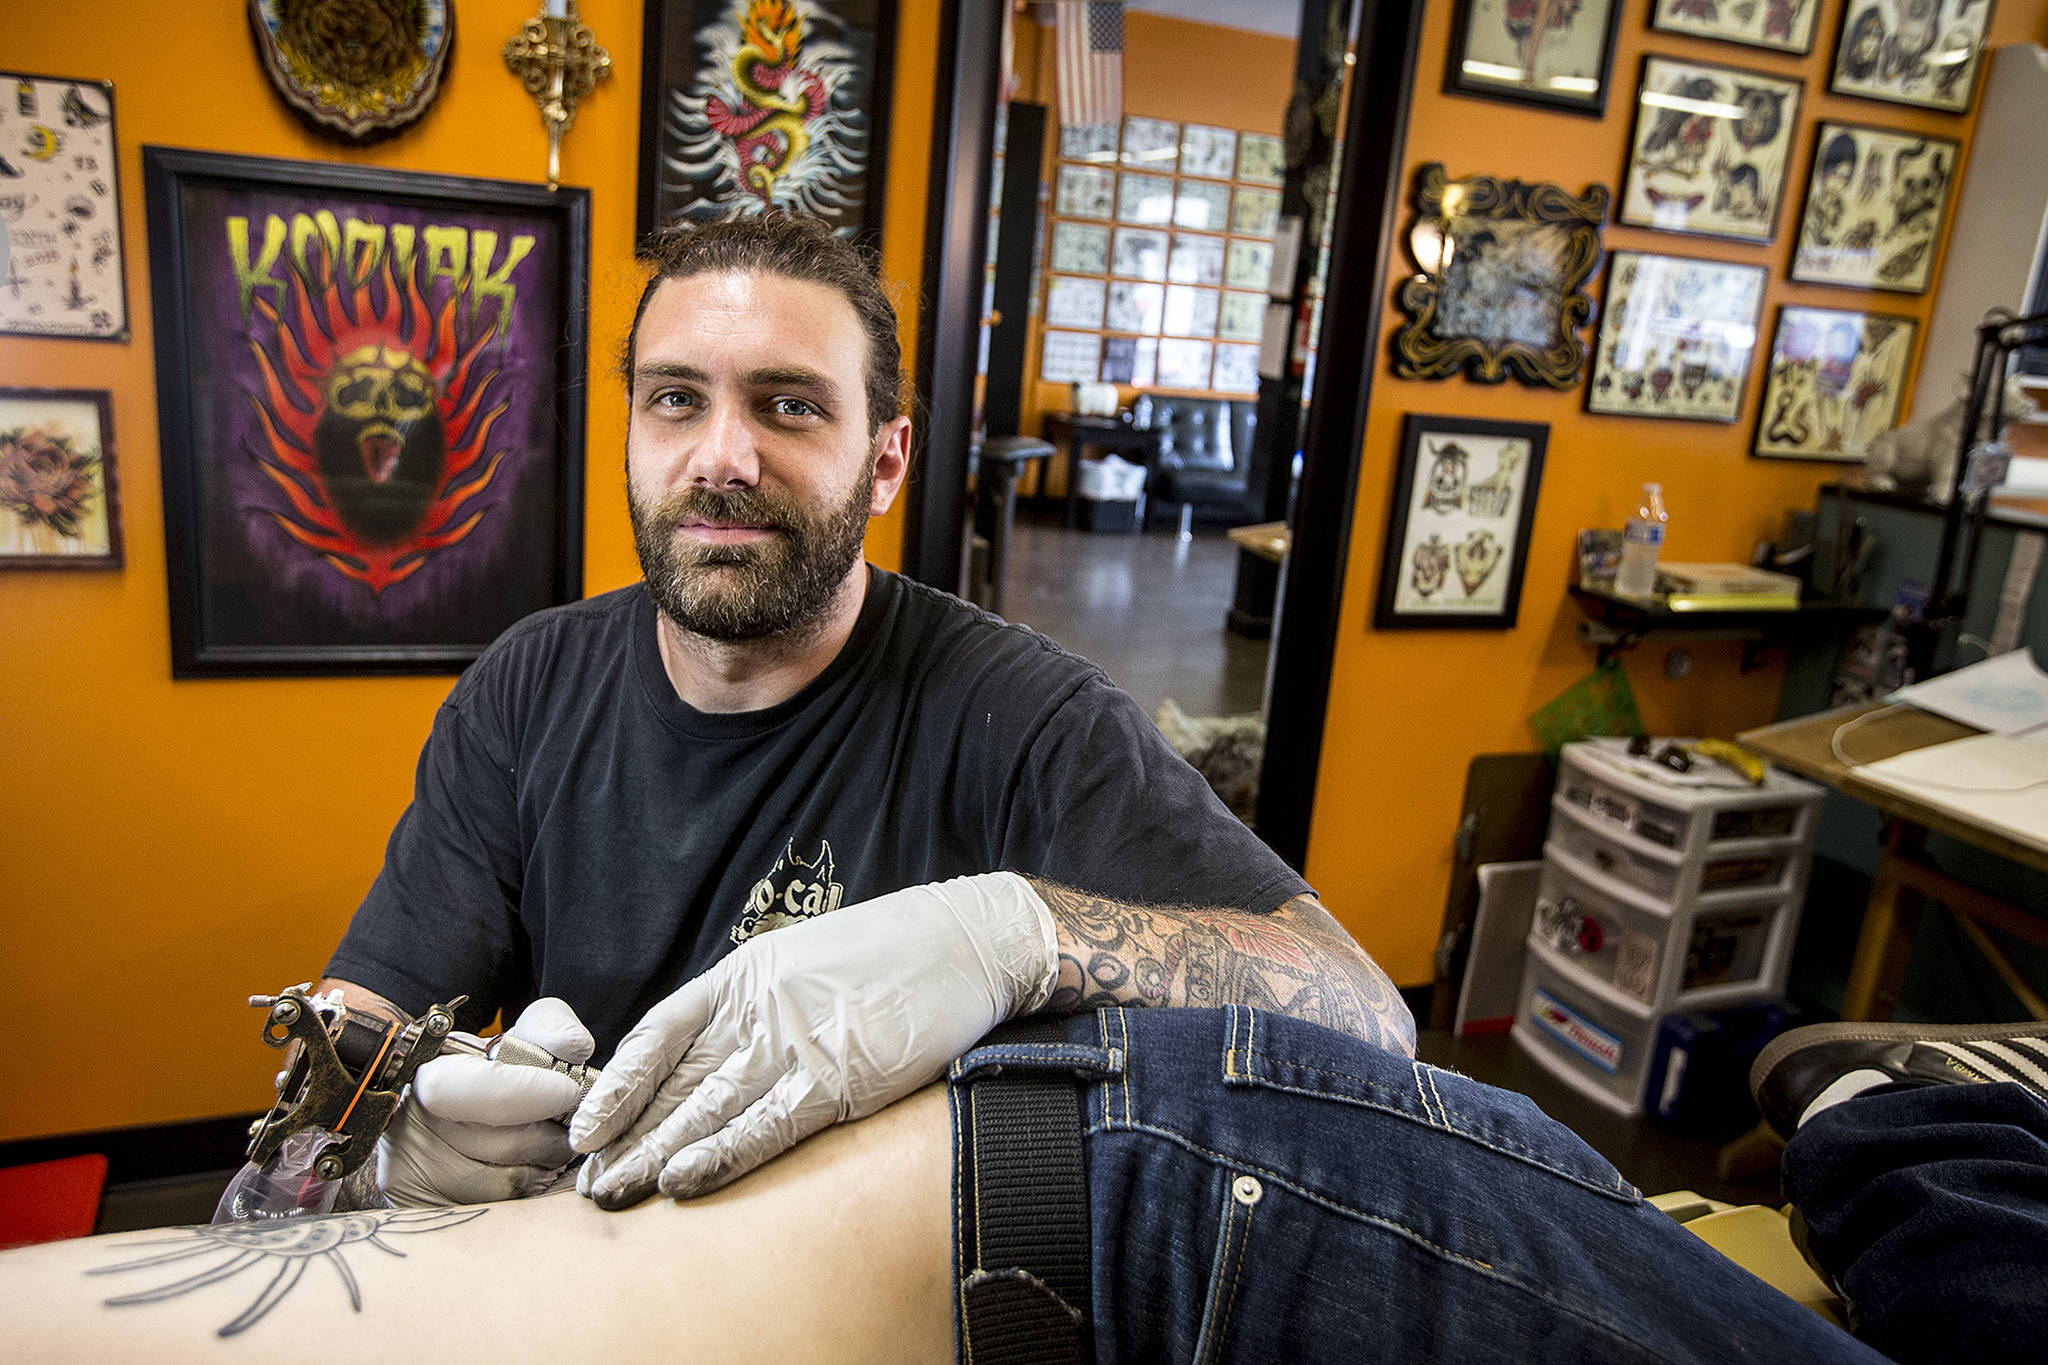 Mike “Kodiak” MacKenzie, owner of Tattoosmith & Piercing in Everett, has been invited back to the Seattle Tattoo Expo for his fourth time. (Ian Terry / The Herald)